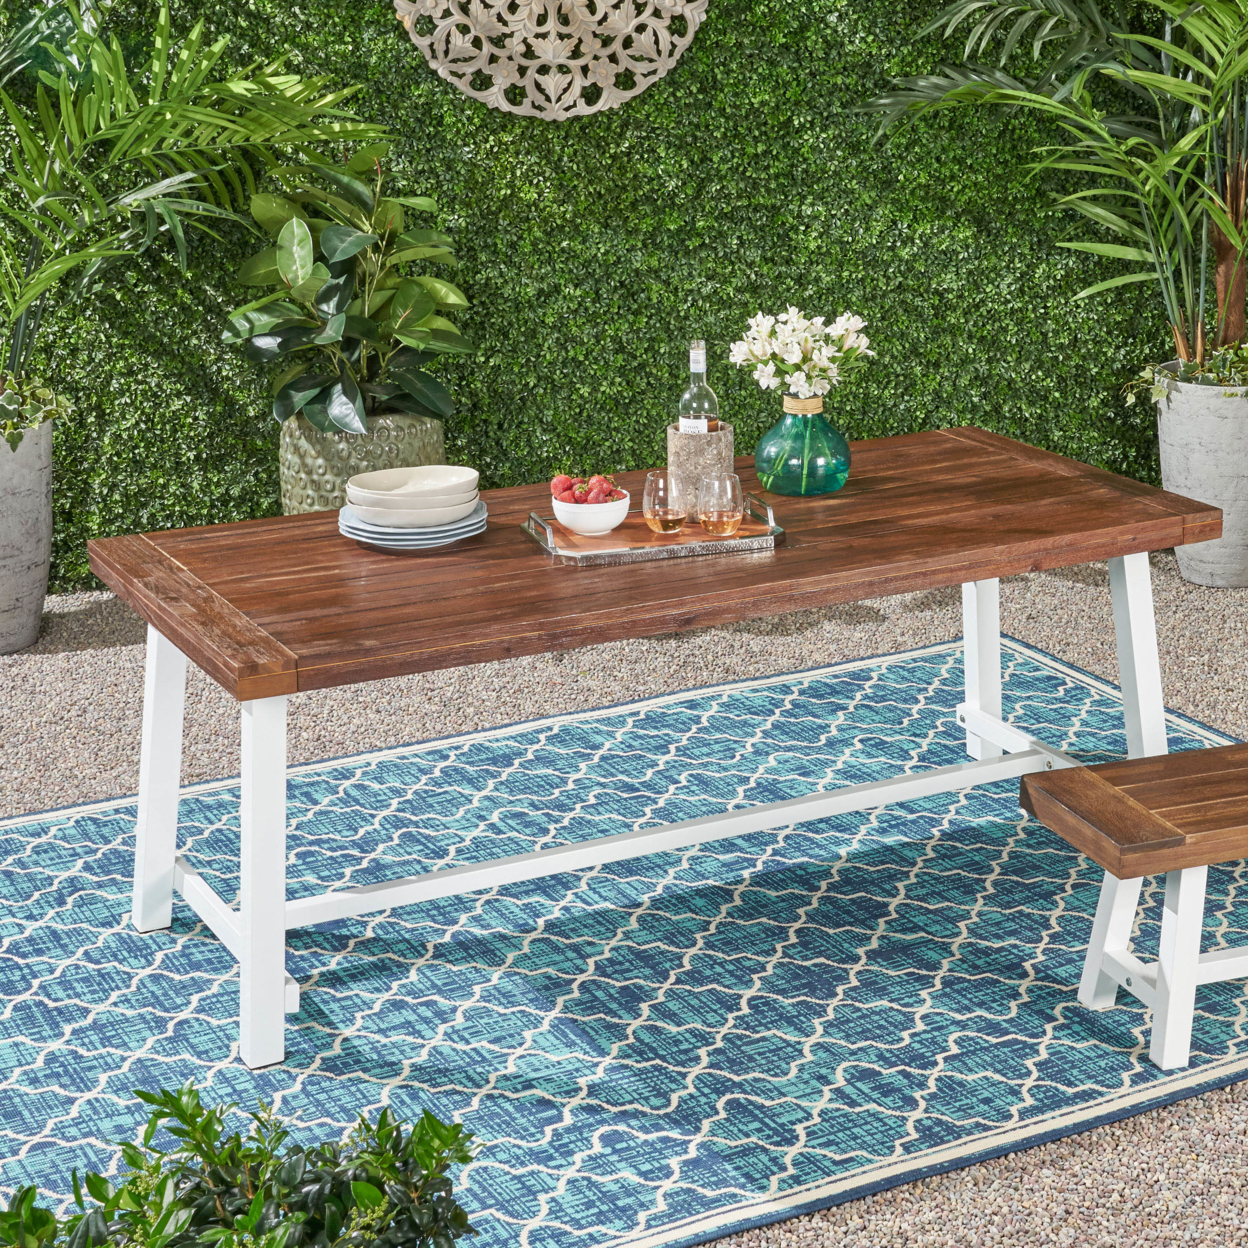 Beau Outdoor Eight Seater Wooden Dining Table - Dark Brown Finish + White Finish